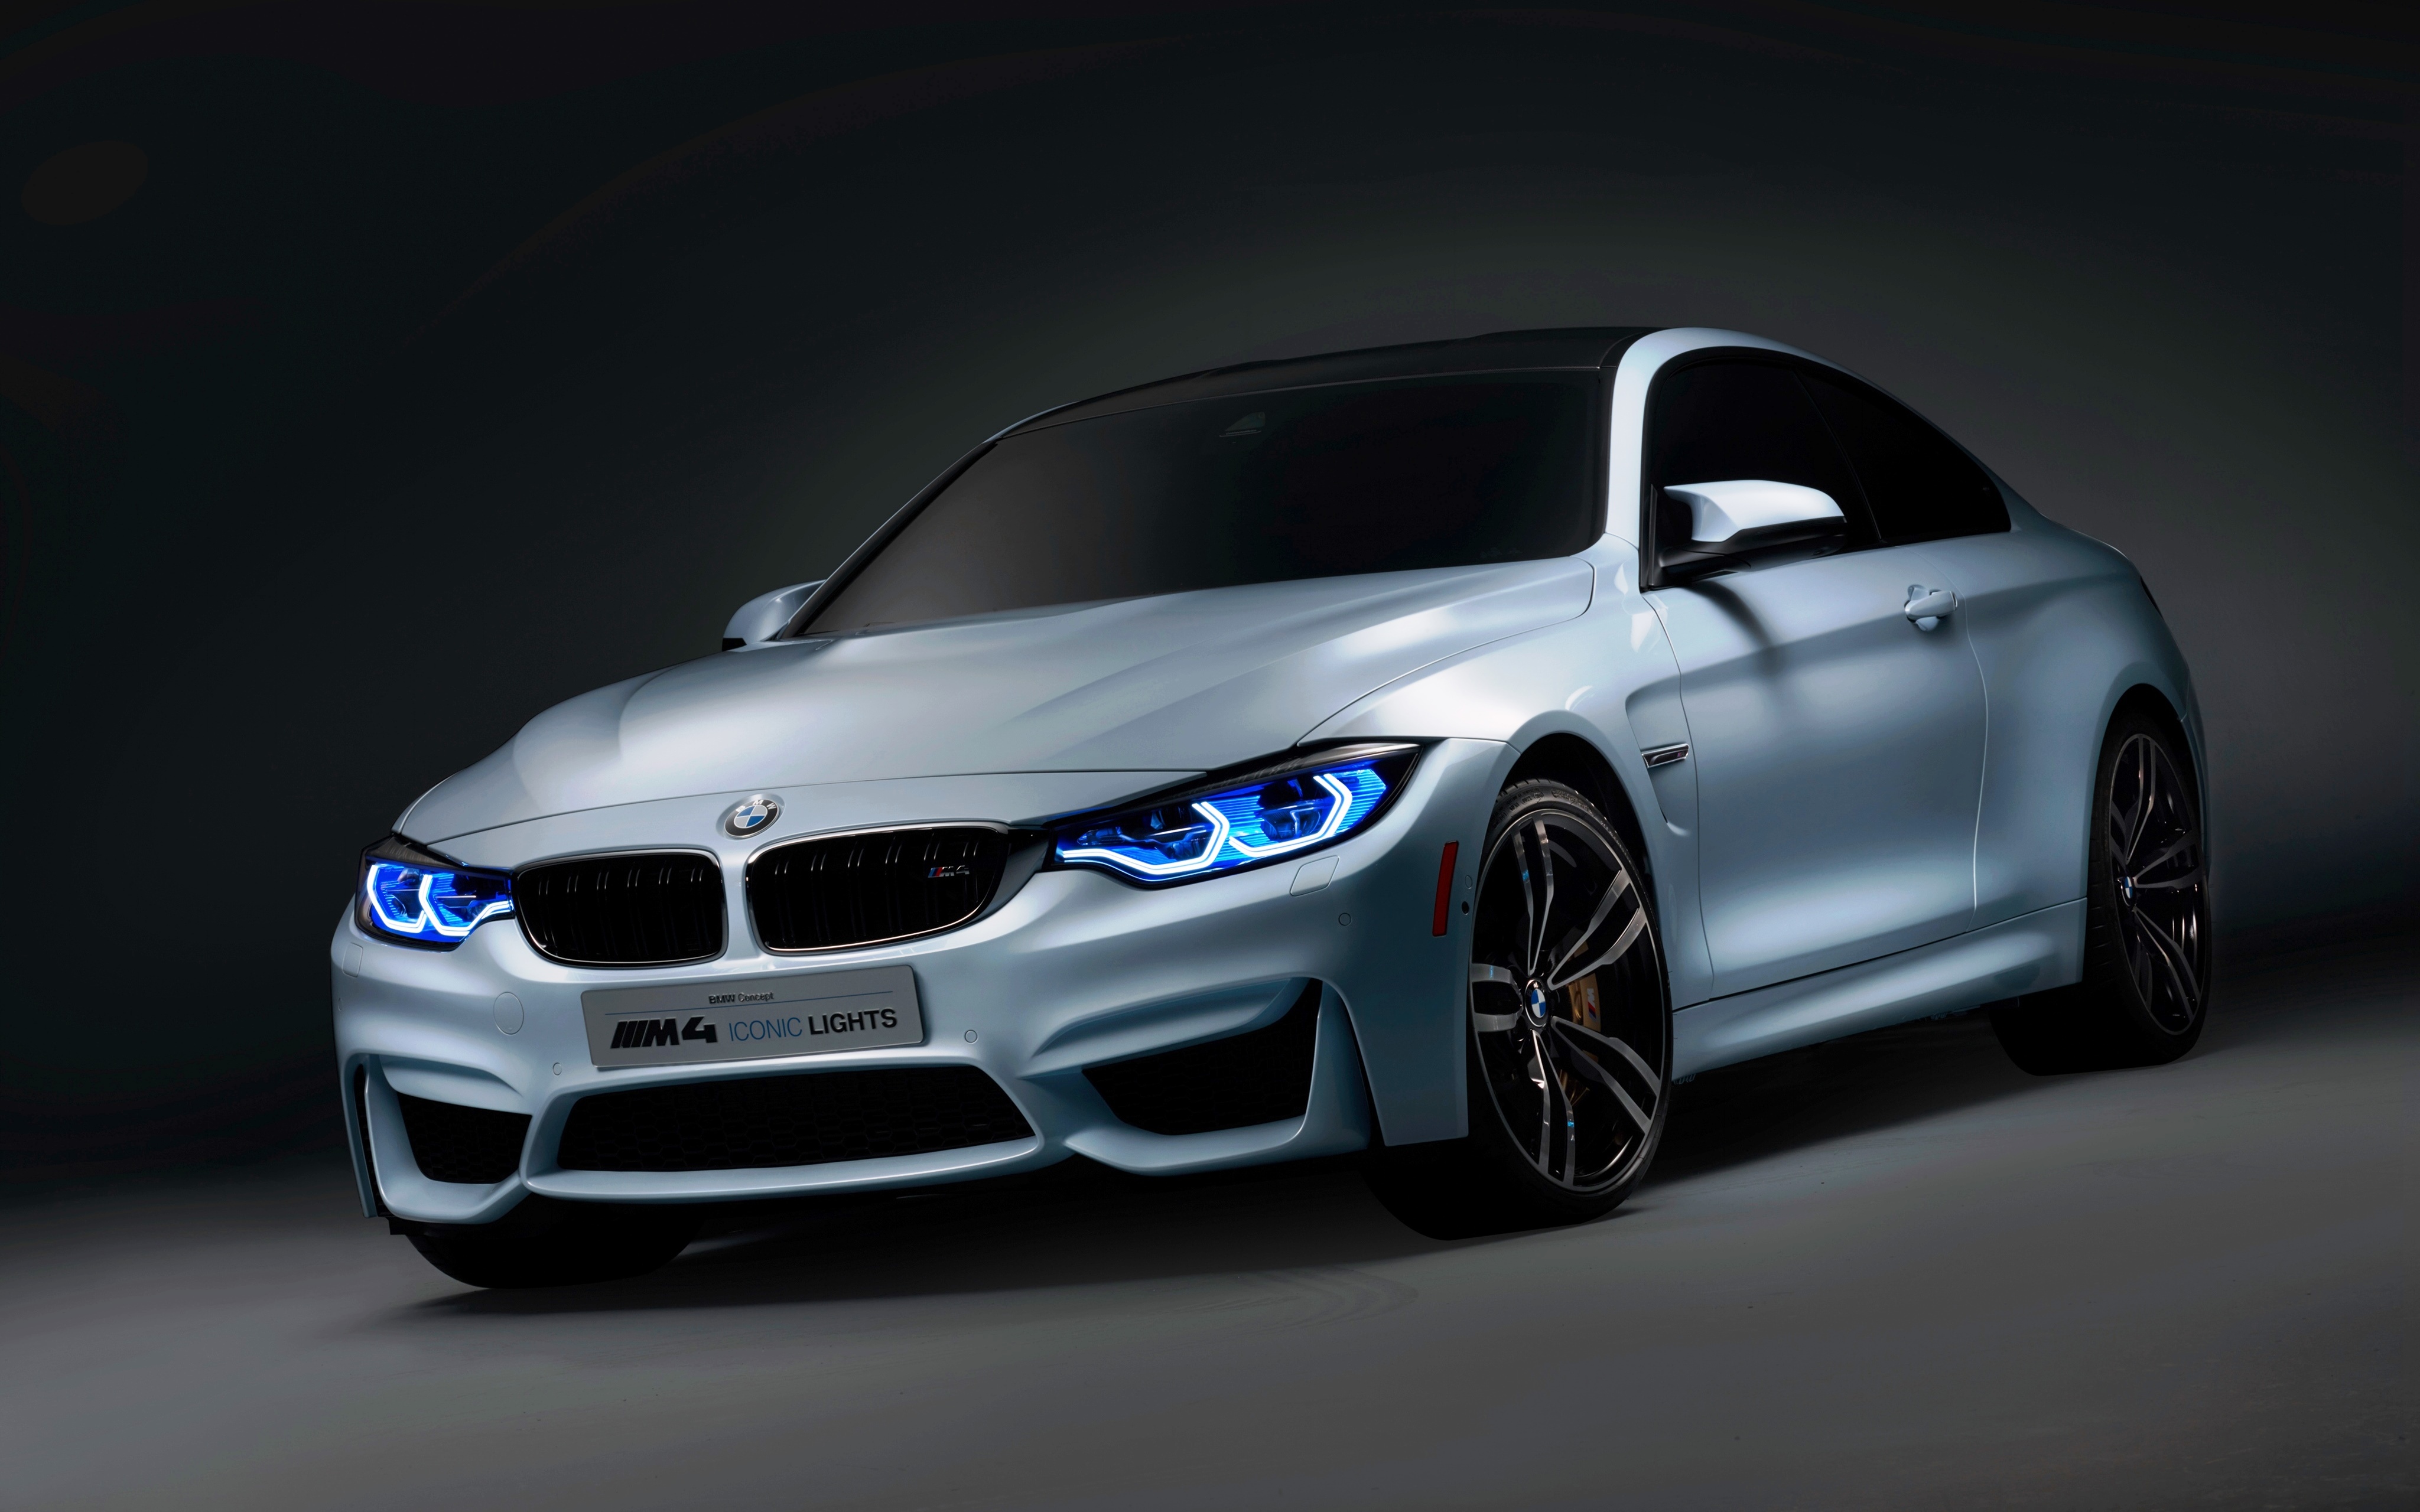 132894 download wallpaper cars, bmw, front view, f82, iconic lights screensavers and pictures for free